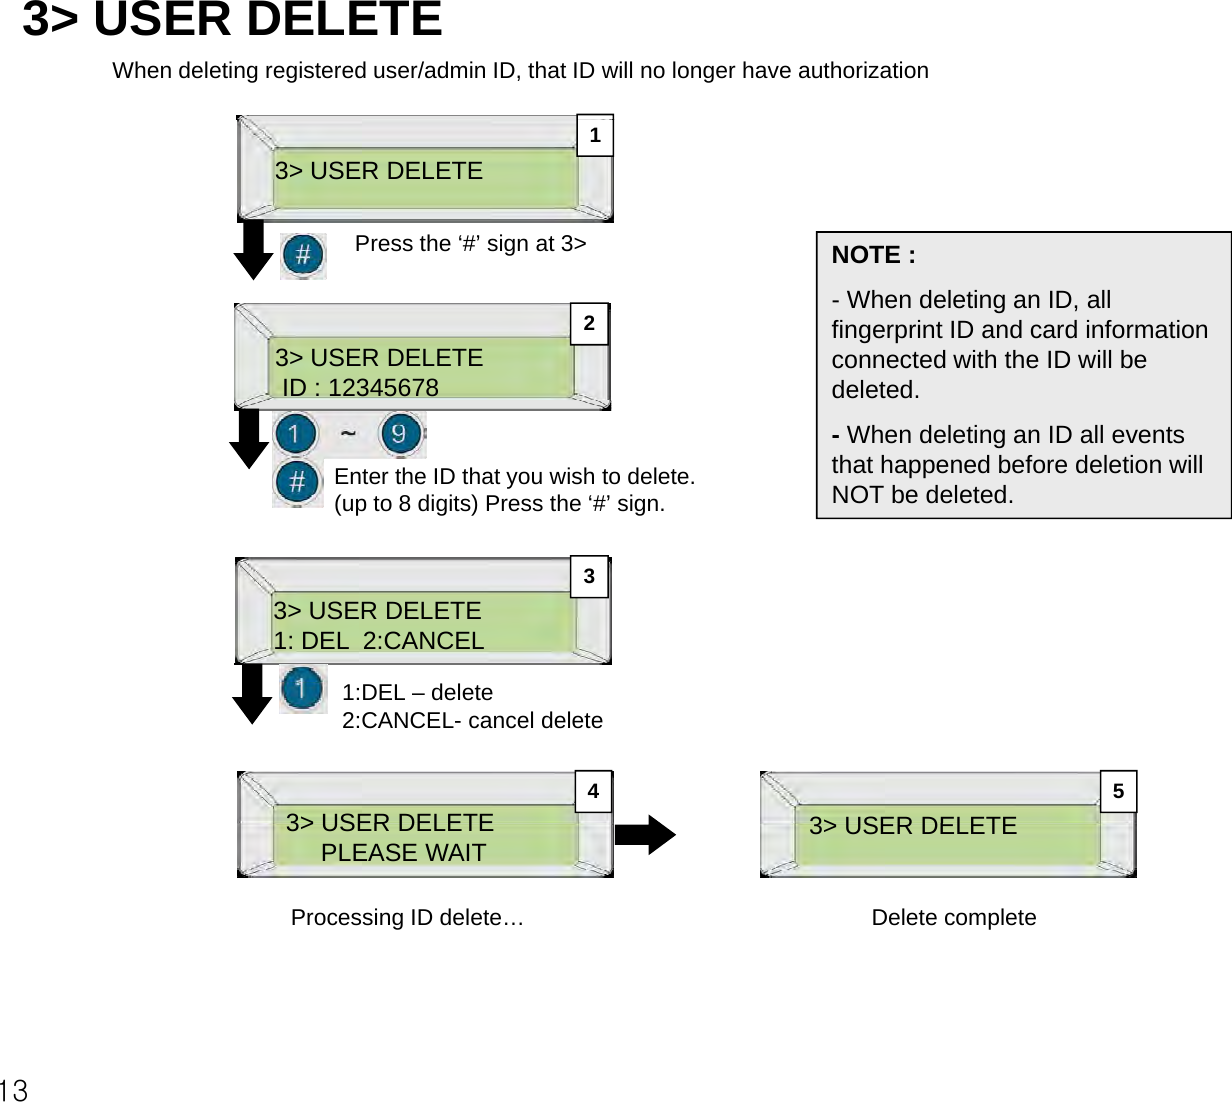 3&gt; USER DELETEWhen deleting registered user/admin ID, that ID will no longer have authorizationNOTE :3&gt; USER DELETE1Press the ‘#’ sign at 3&gt;3&gt; USER DELETEID : 12345678NOTE :- When deleting an ID, all fingerprint ID and card information connected with the ID will be deleted.2-When deleting an ID all events that happened before deletion will NOT be deleted.Enter the ID that you wish to delete.(up to 8 digits) Press the ‘#’ sign.3&gt; USER DELETE1: DEL  2:CANCEL33&gt; USER DELETE4 51:DEL –delete2:CANCEL- cancel delete3&gt; USER DELETE3&gt; USER DELETEPLEASE WAITProcessing ID delete… Delete complete3&gt; USER DELETE13